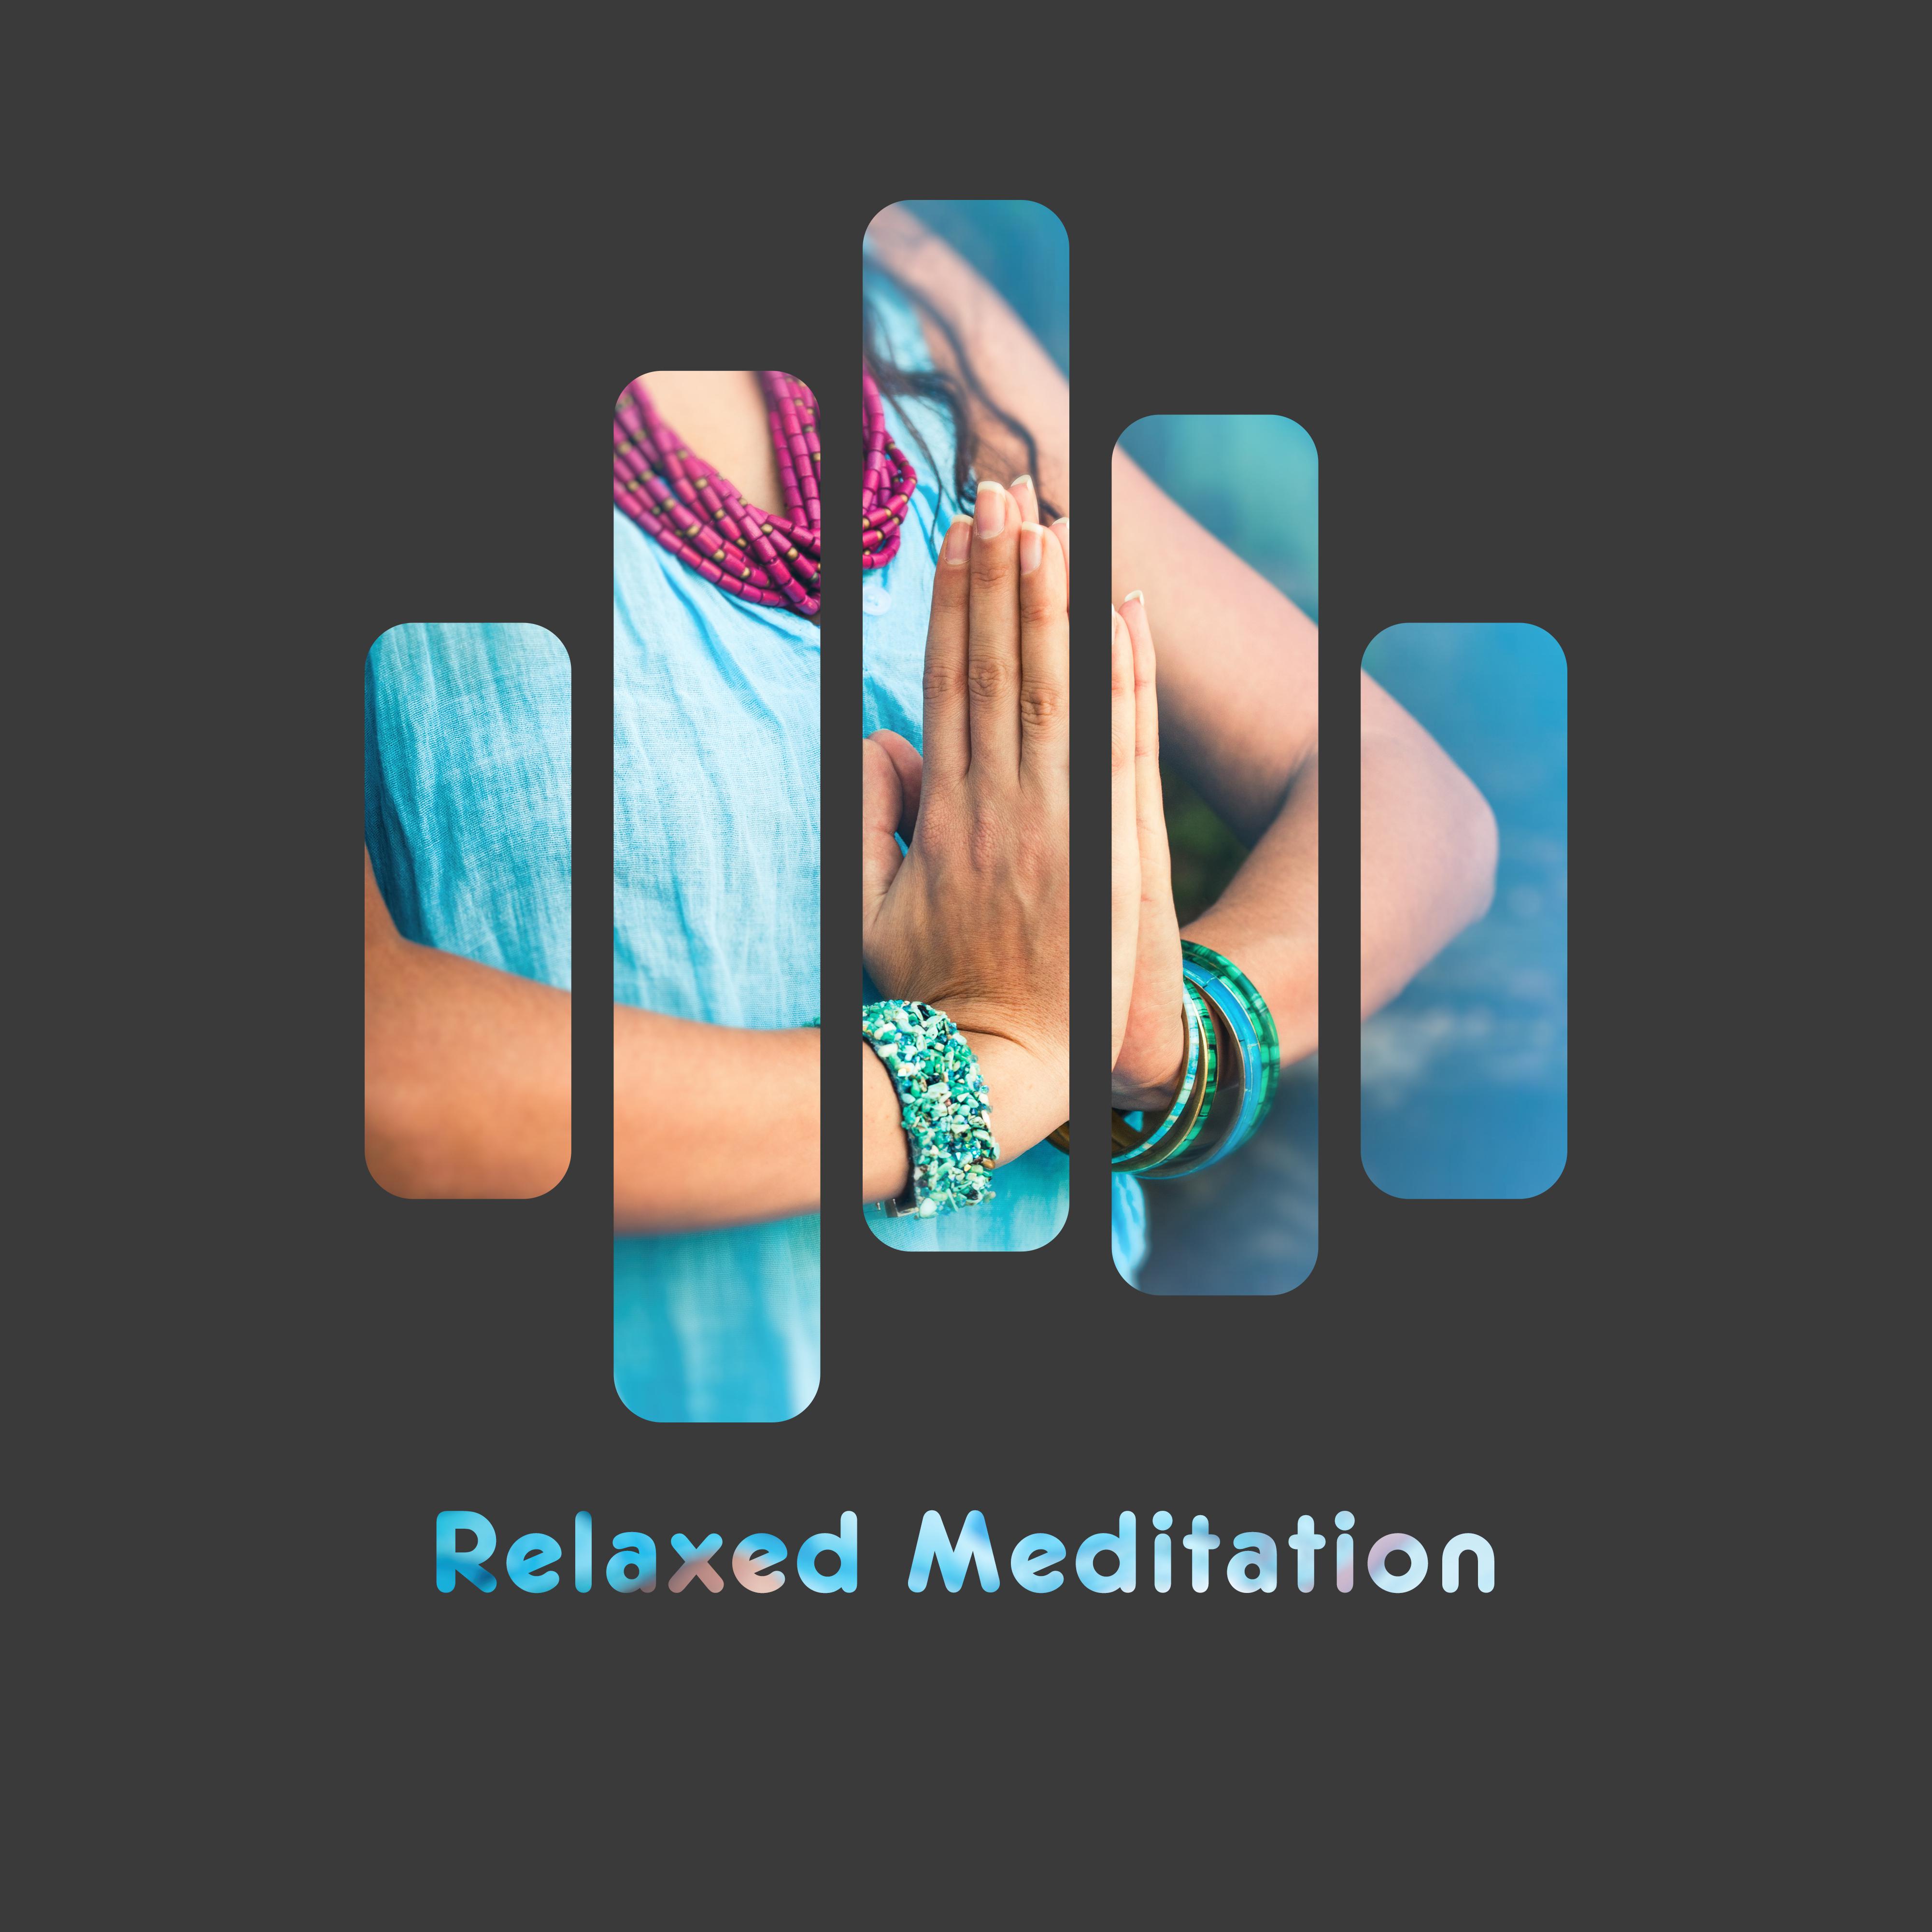 Relaxed Meditation